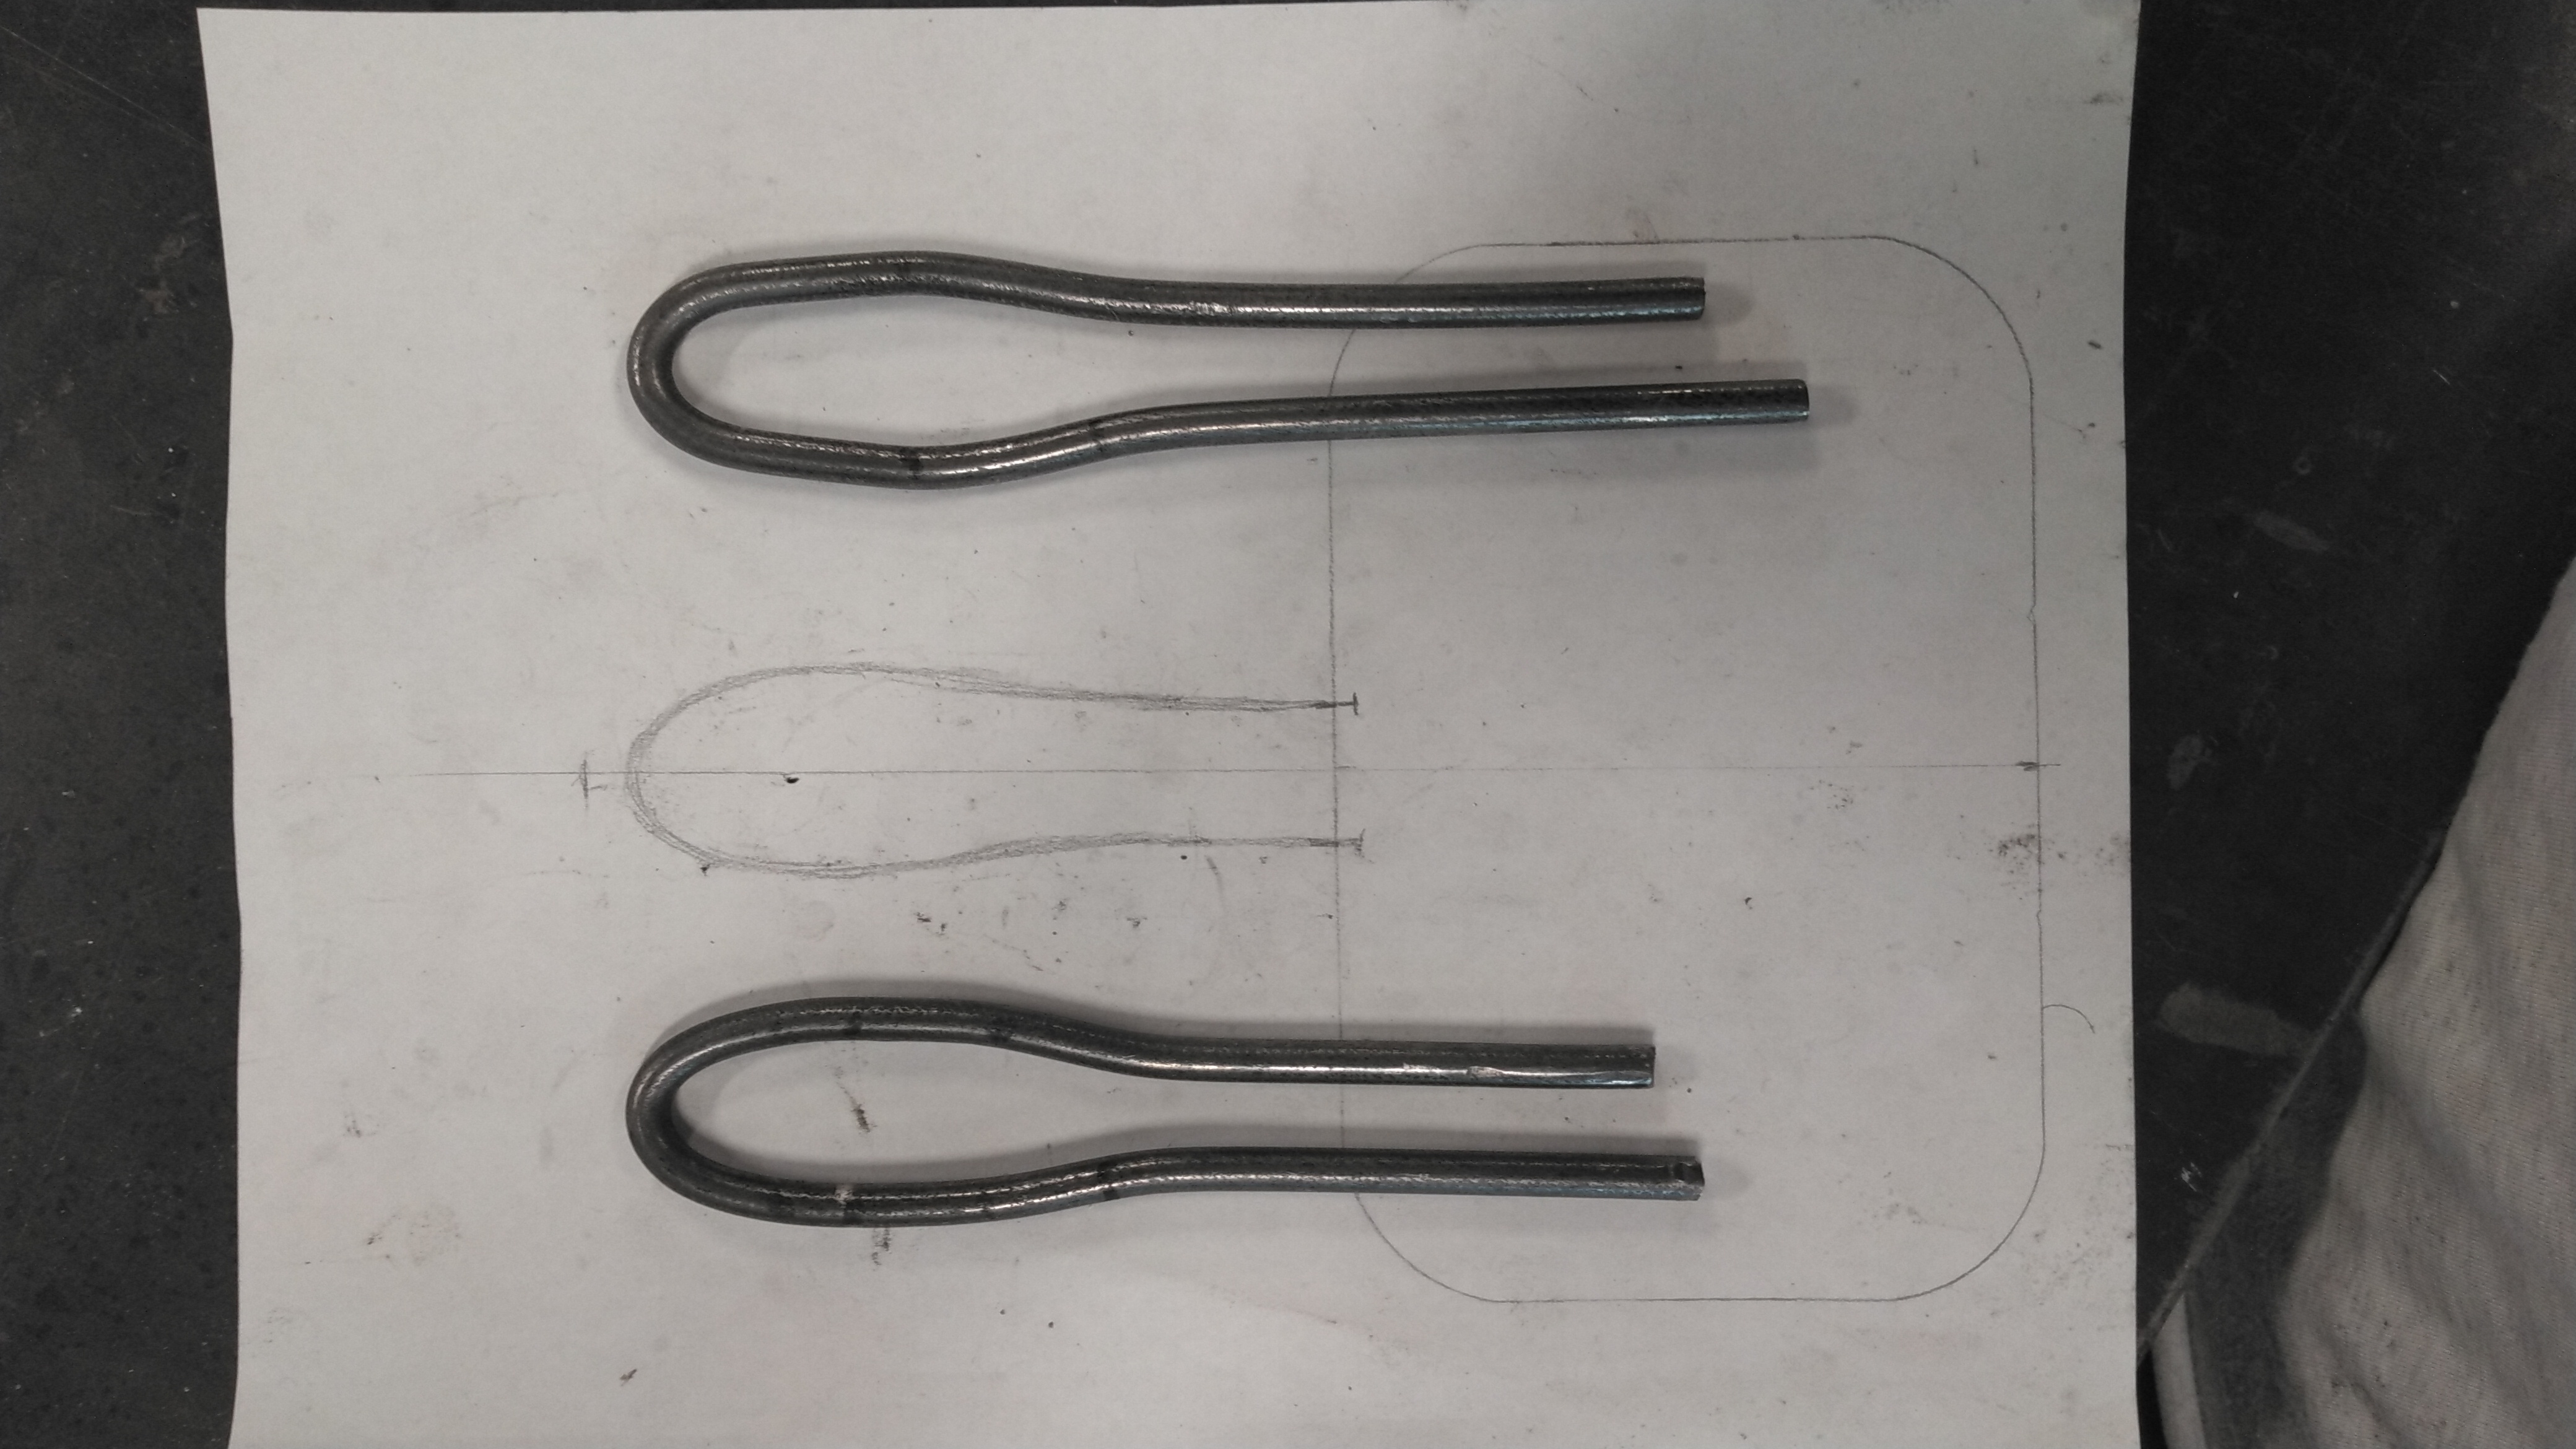 two steel handles being compared to a template